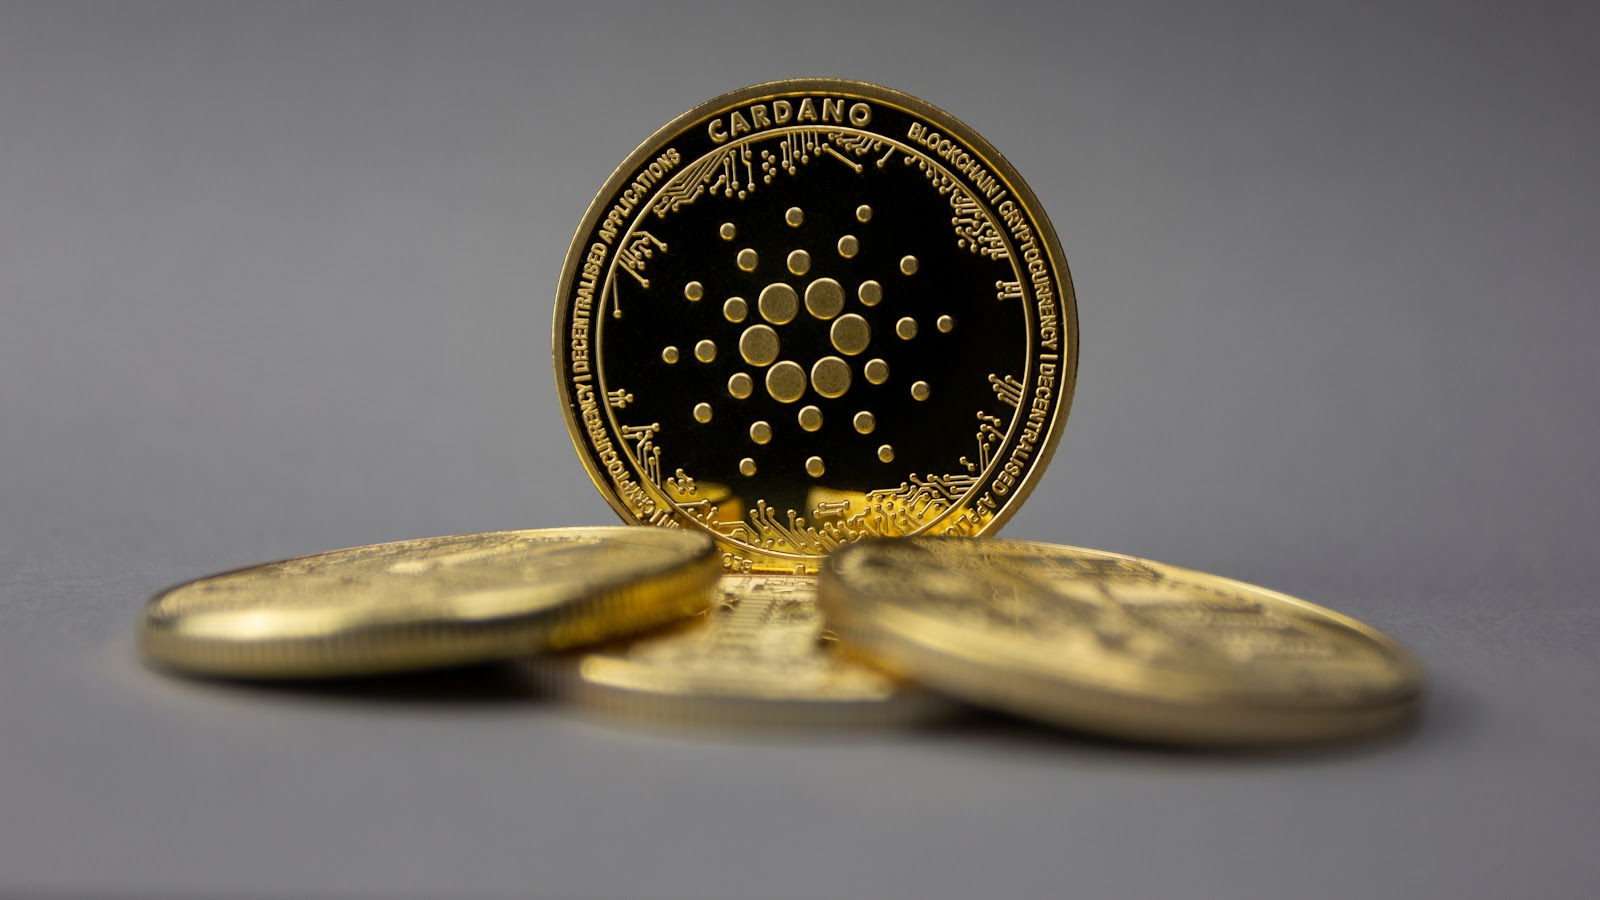 Optimism (OP) and Cardano (ADA) investors are rushing to buy into the new Pushd (PUSHD) presale